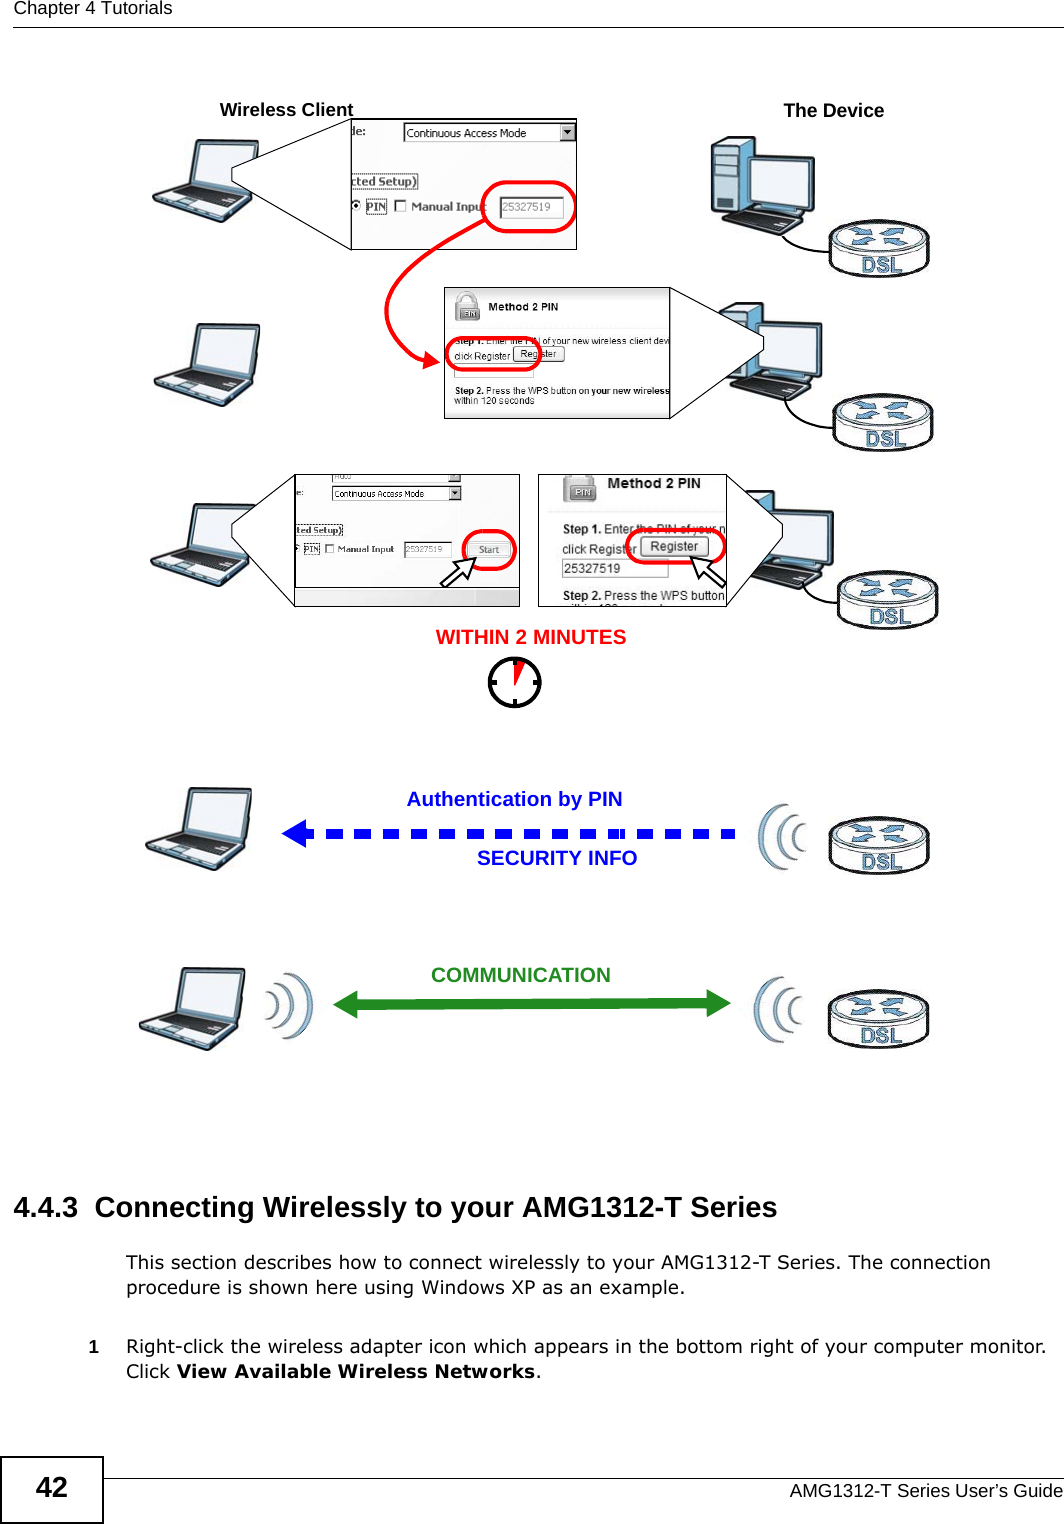 Chapter 4 TutorialsAMG1312-T Series User’s Guide42Example WPS Process: PIN Method4.4.3  Connecting Wirelessly to your AMG1312-T SeriesThis section describes how to connect wirelessly to your AMG1312-T Series. The connection procedure is shown here using Windows XP as an example. 1Right-click the wireless adapter icon which appears in the bottom right of your computer monitor. Click View Available Wireless Networks. Authentication by PINSECURITY INFOWITHIN 2 MINUTESWireless ClientThe DeviceCOMMUNICATION